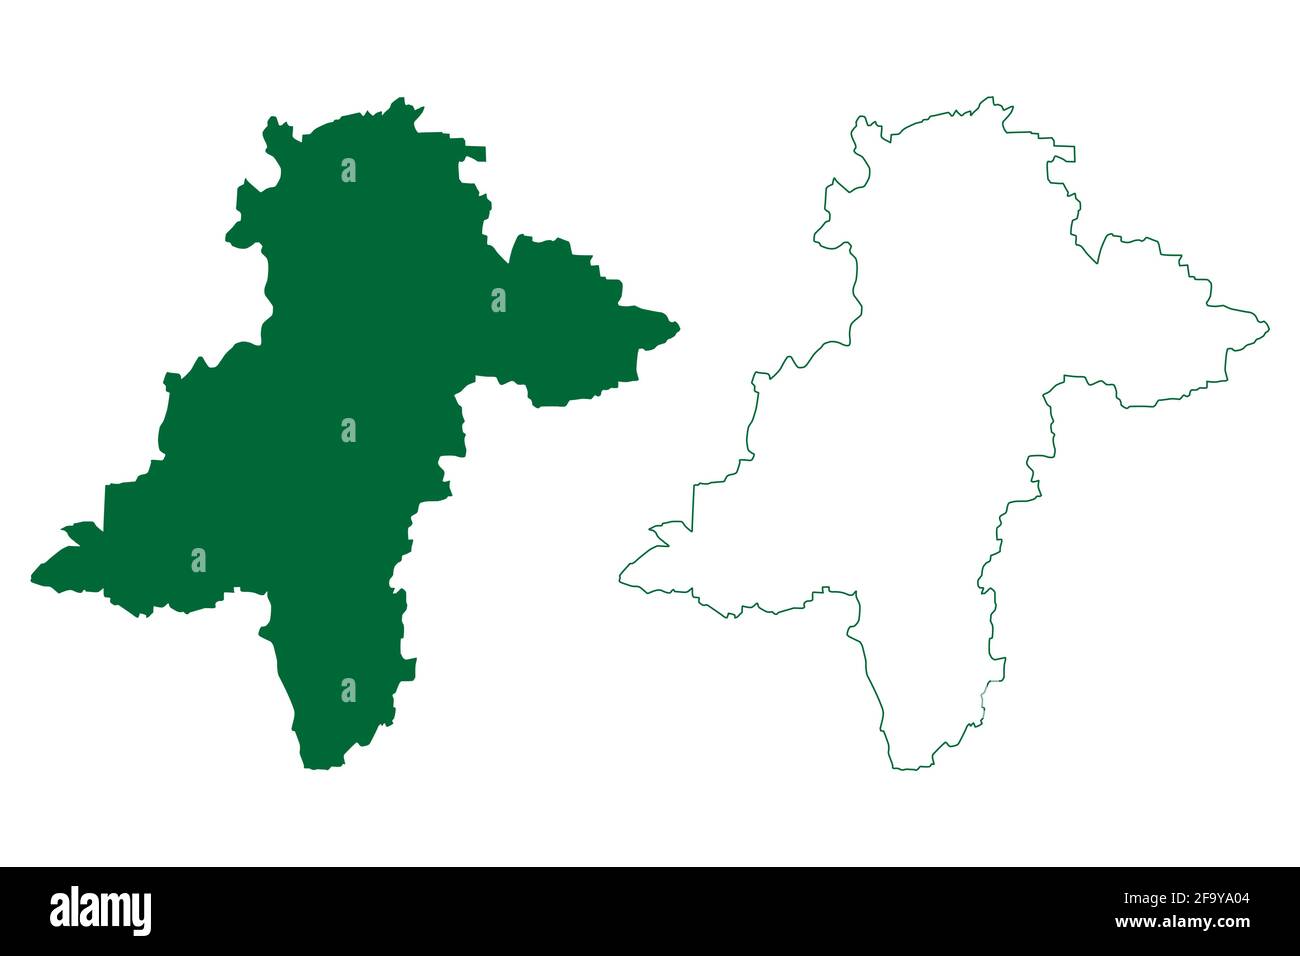 Davanagere district (Karnataka State, Republic of India, Bangalore Division) map vector illustration, scribble sketch Davanagere map Stock Vector